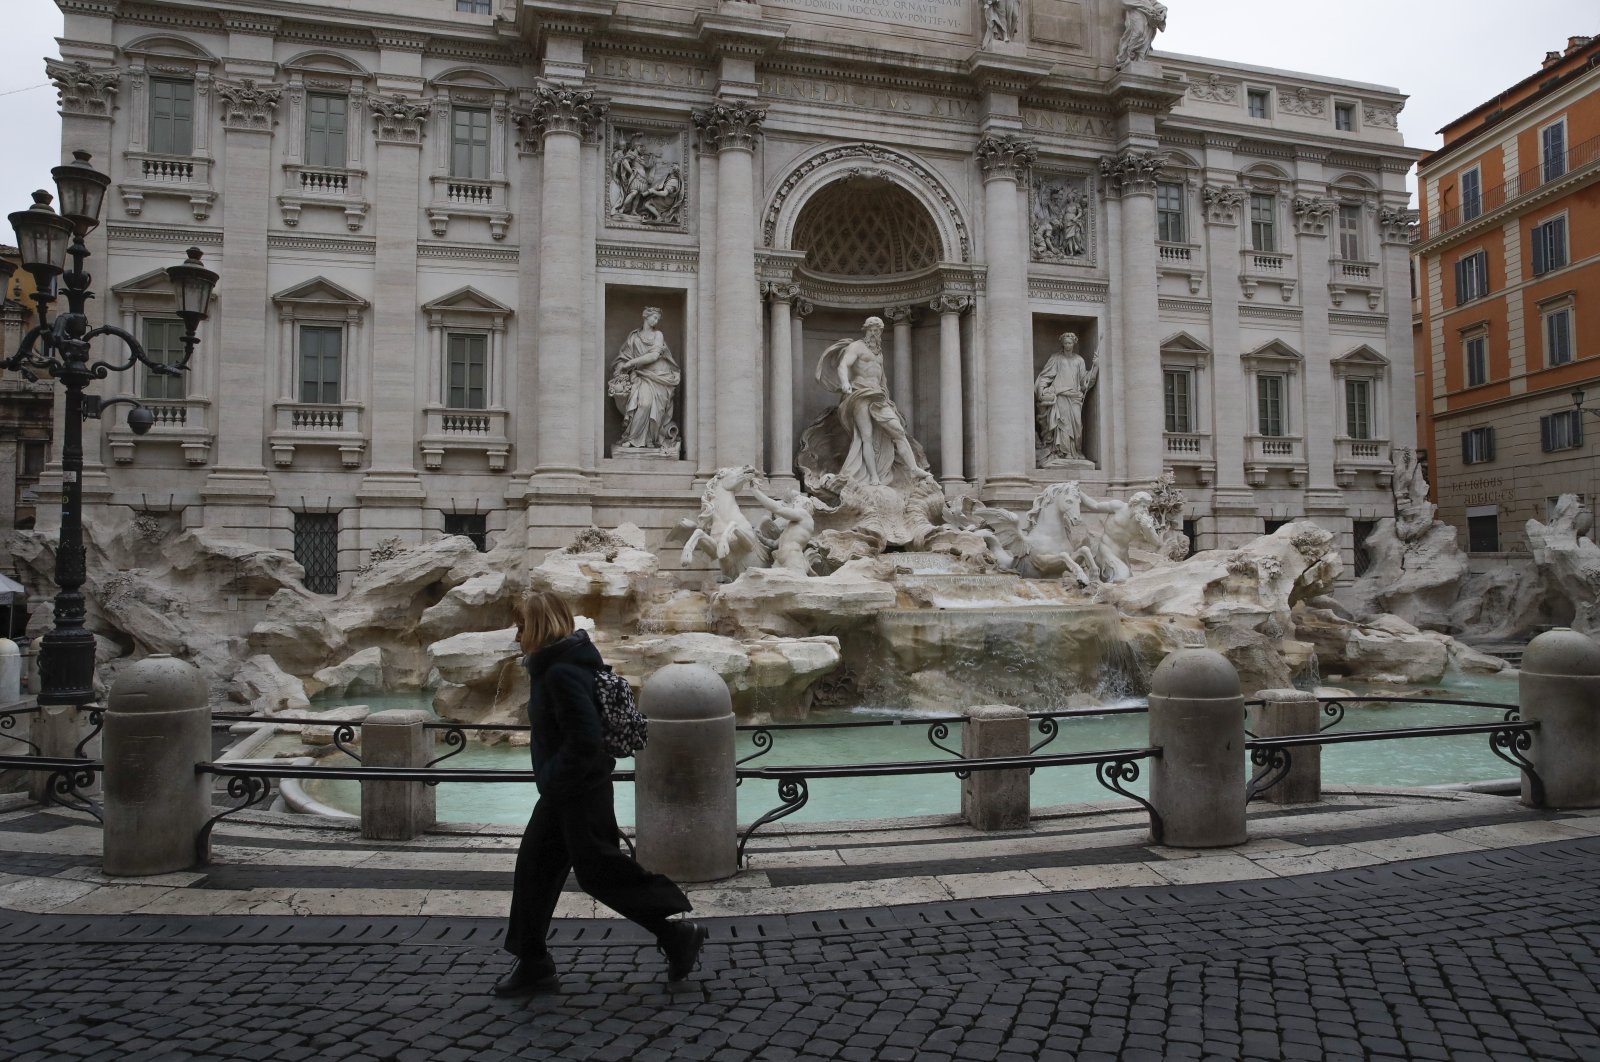 A woman walks past the Trevi fountain in Rome, Friday, March 13, 2020. (AP Photo)